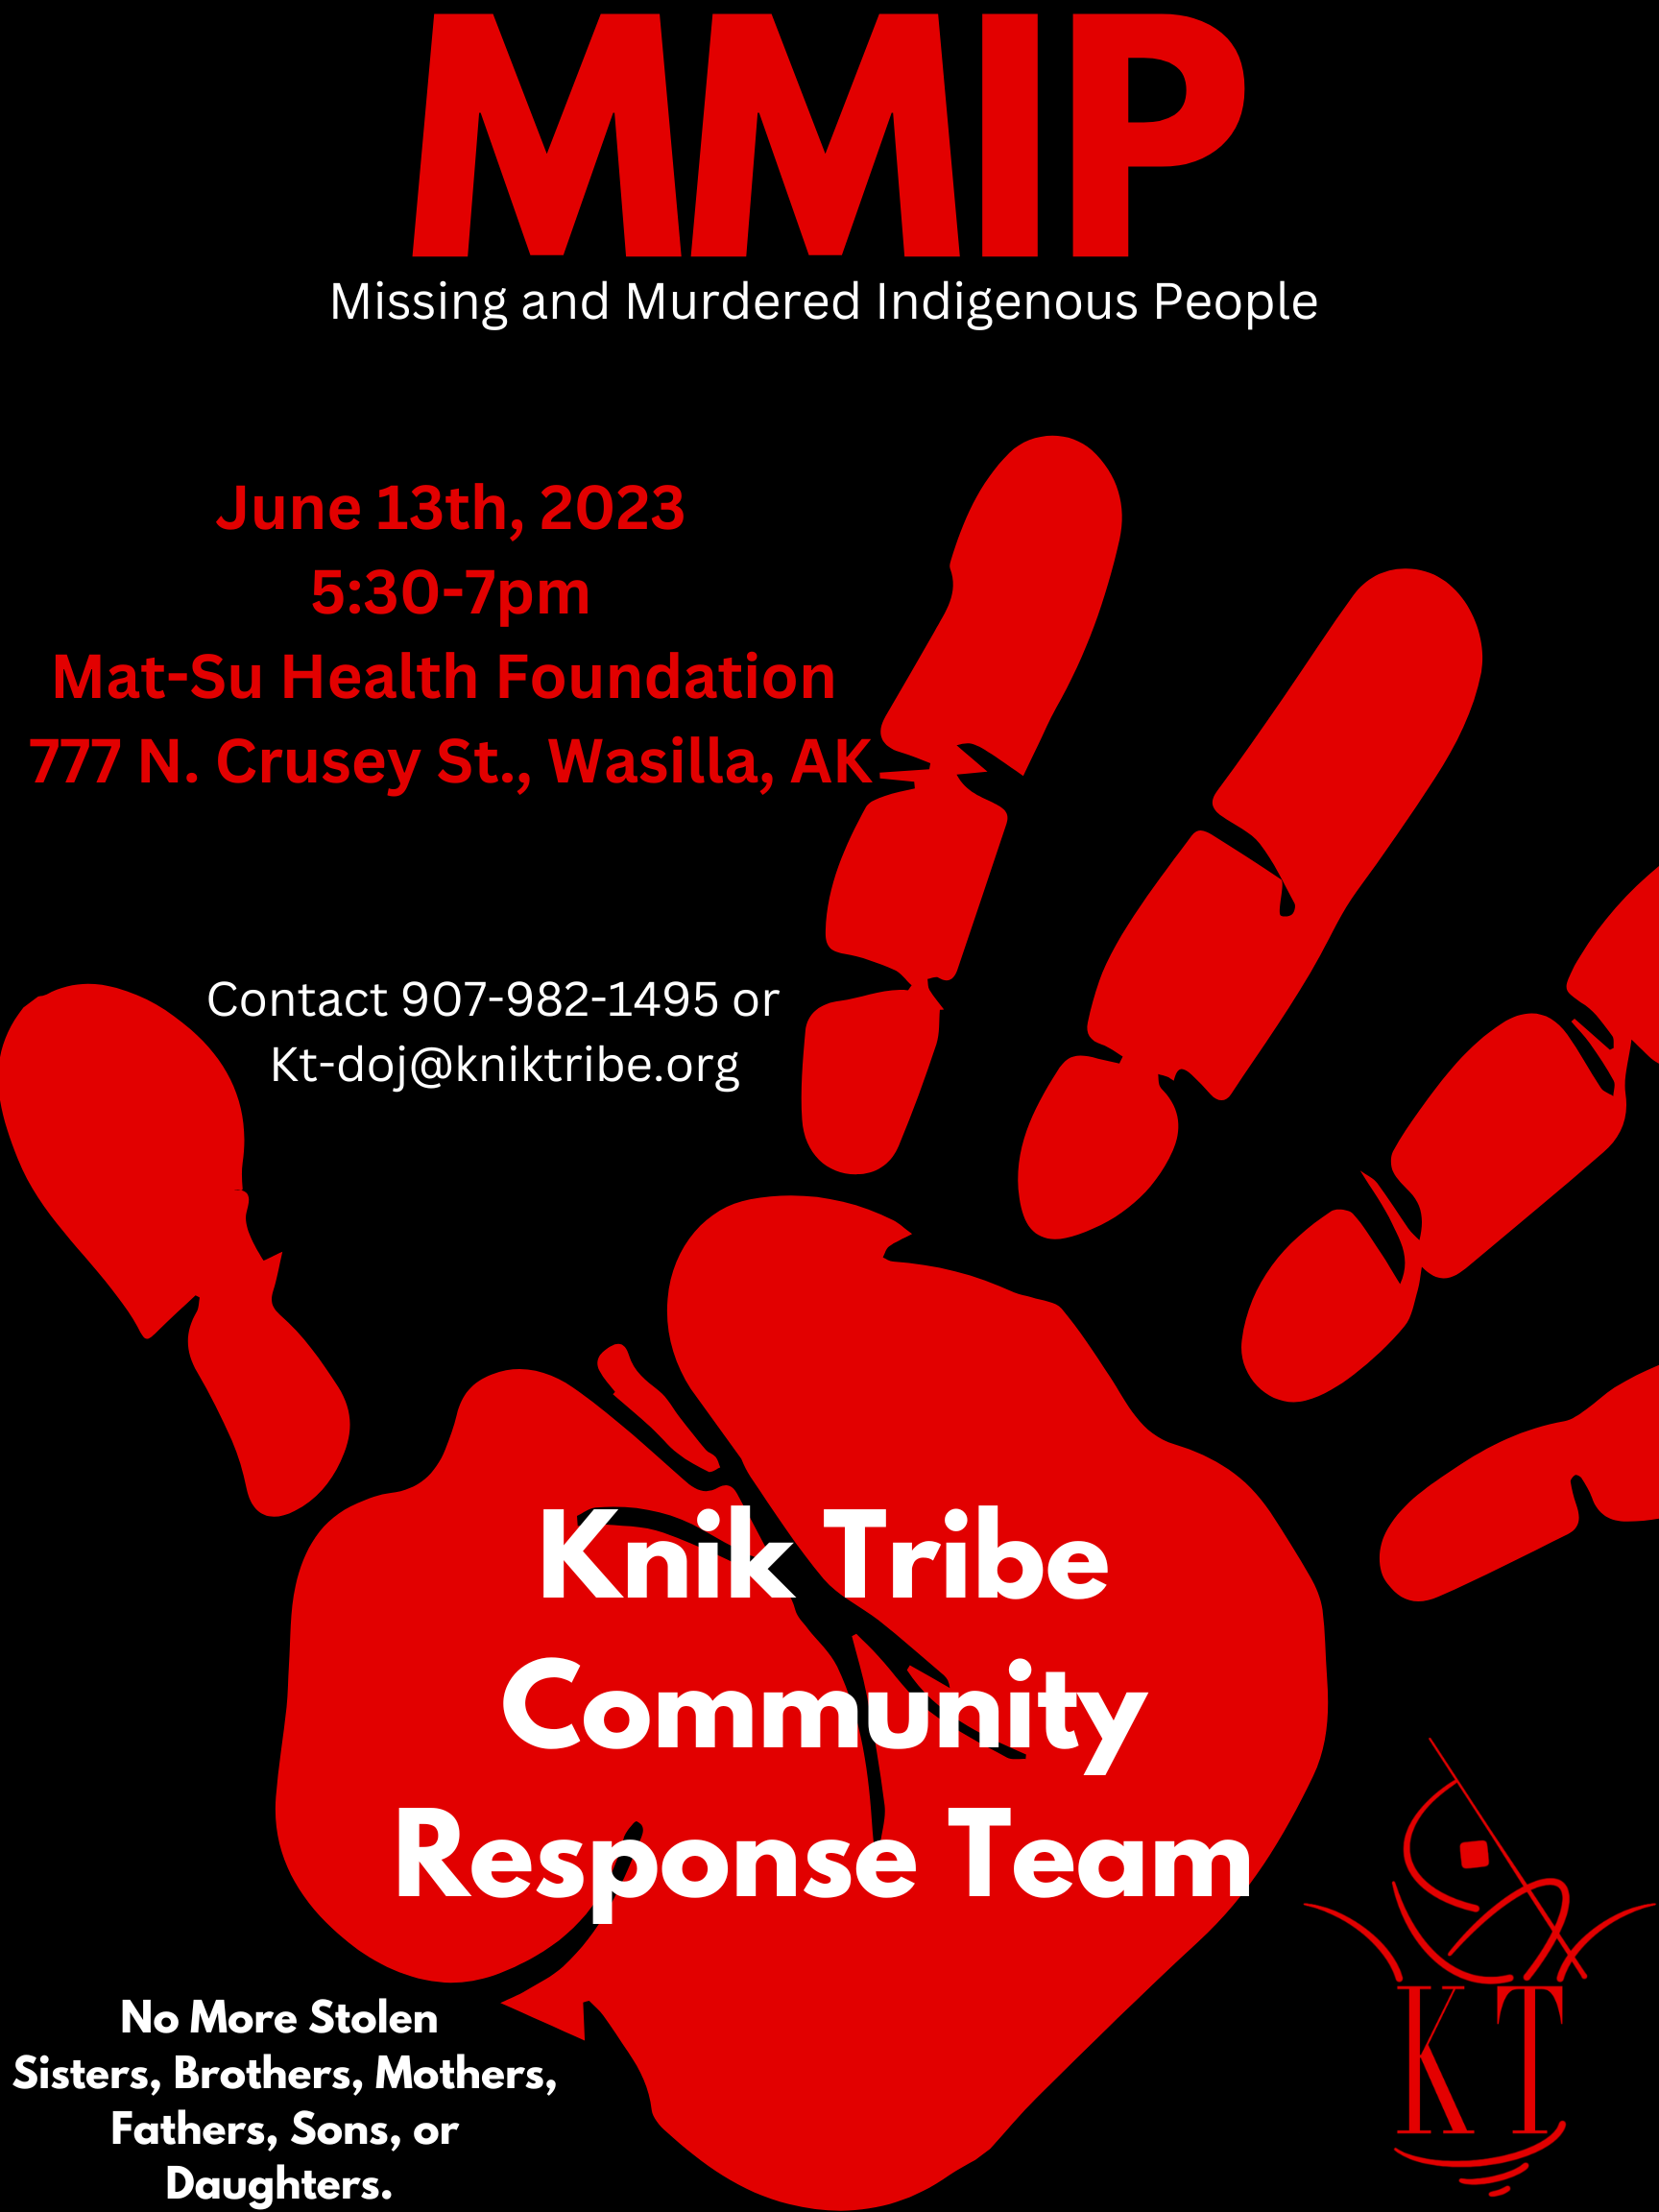 Missing and Murdered Indigenous People Community Cafe and Response Team Meeting